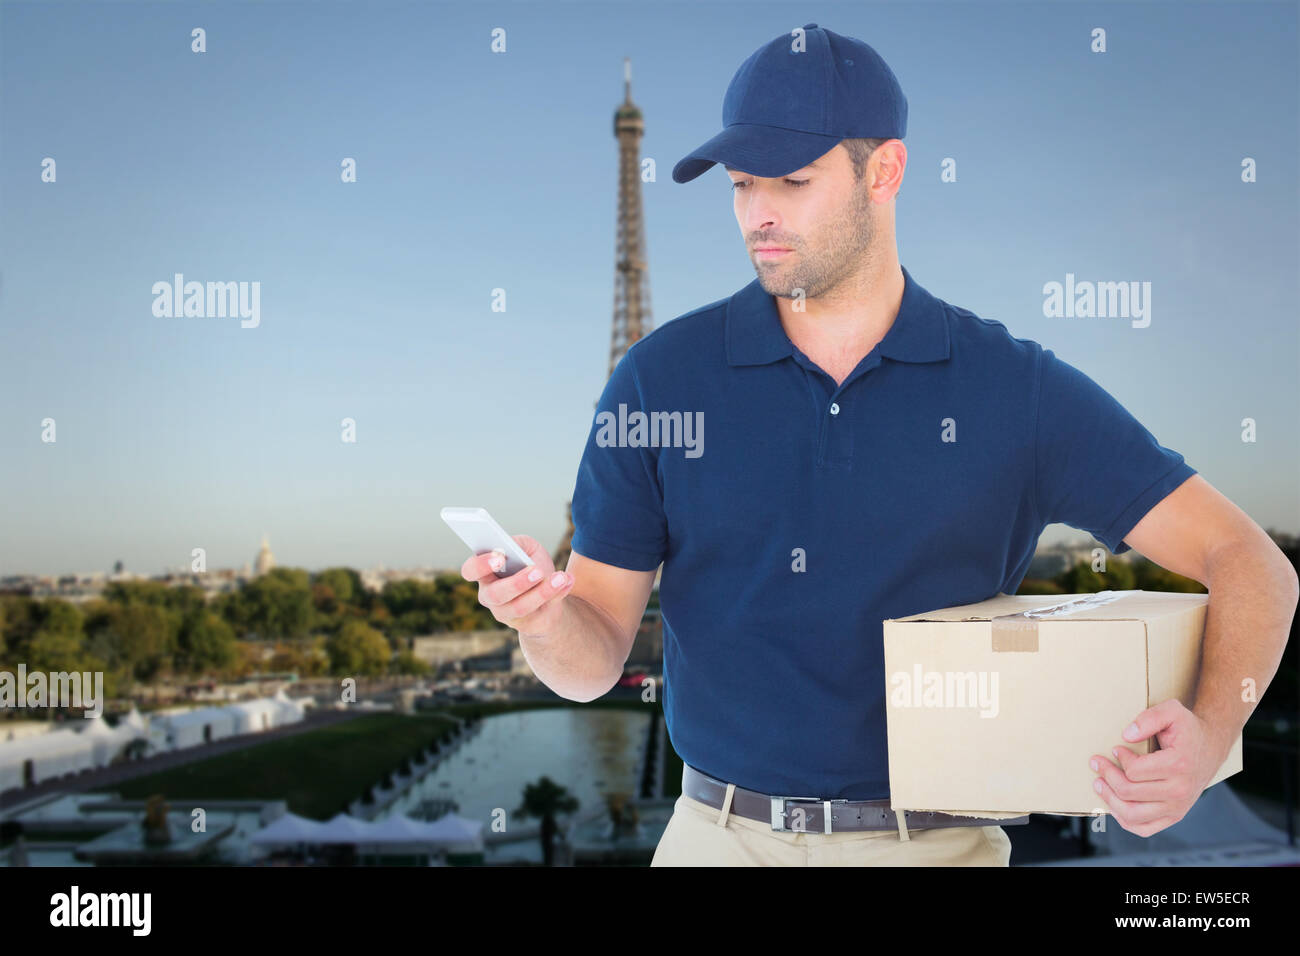 Composite image of delivery man using mobile phone while holding package Stock Photo